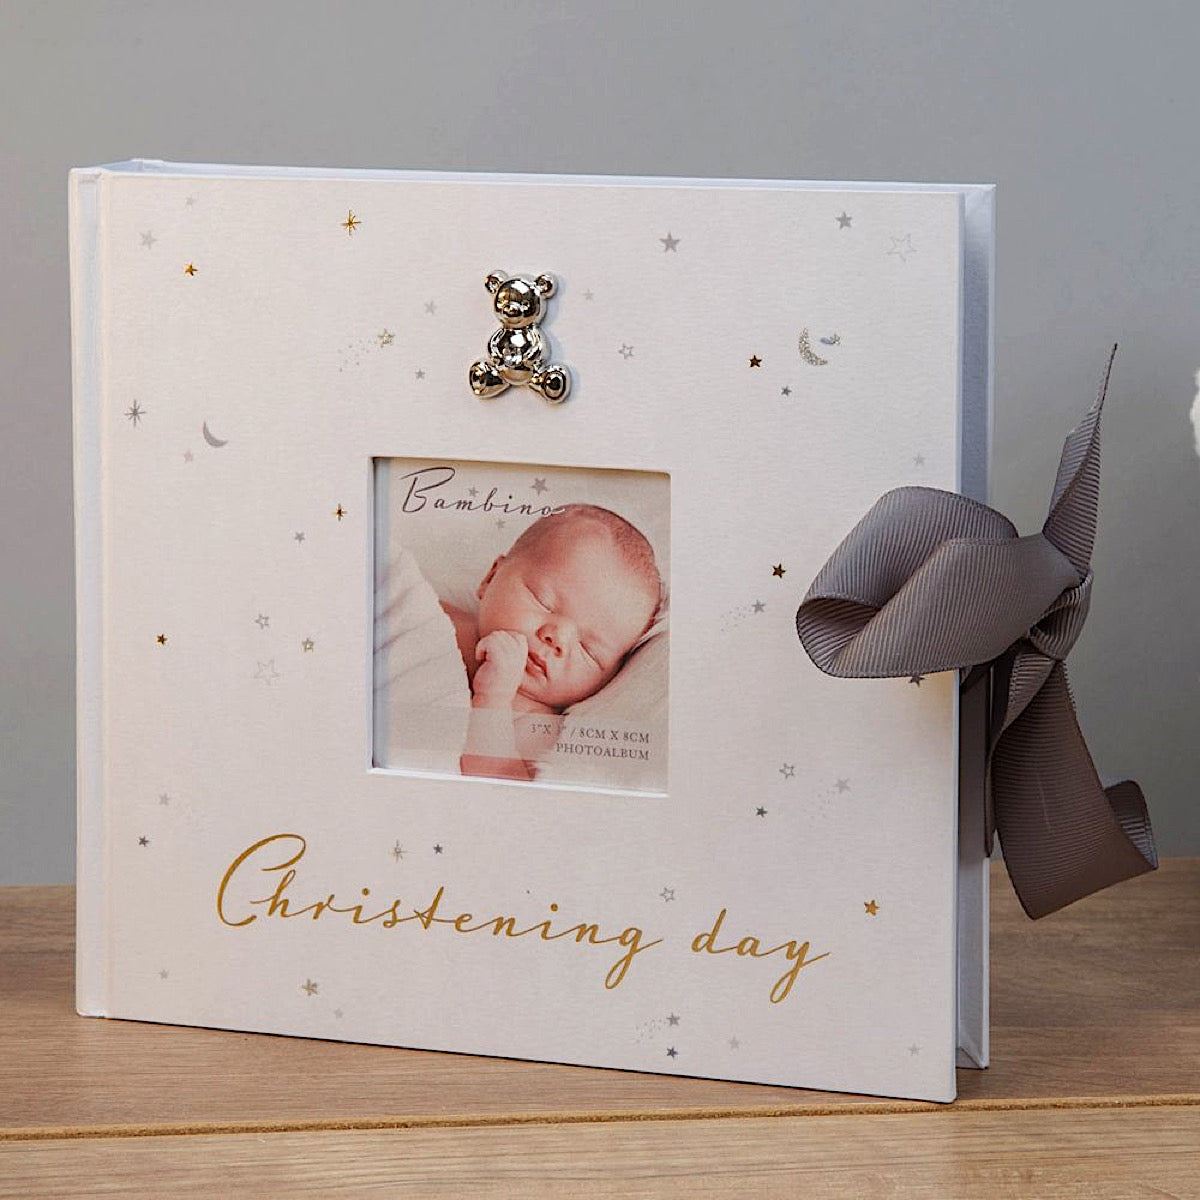 Bambino Christening Album – More Than Just a Gift